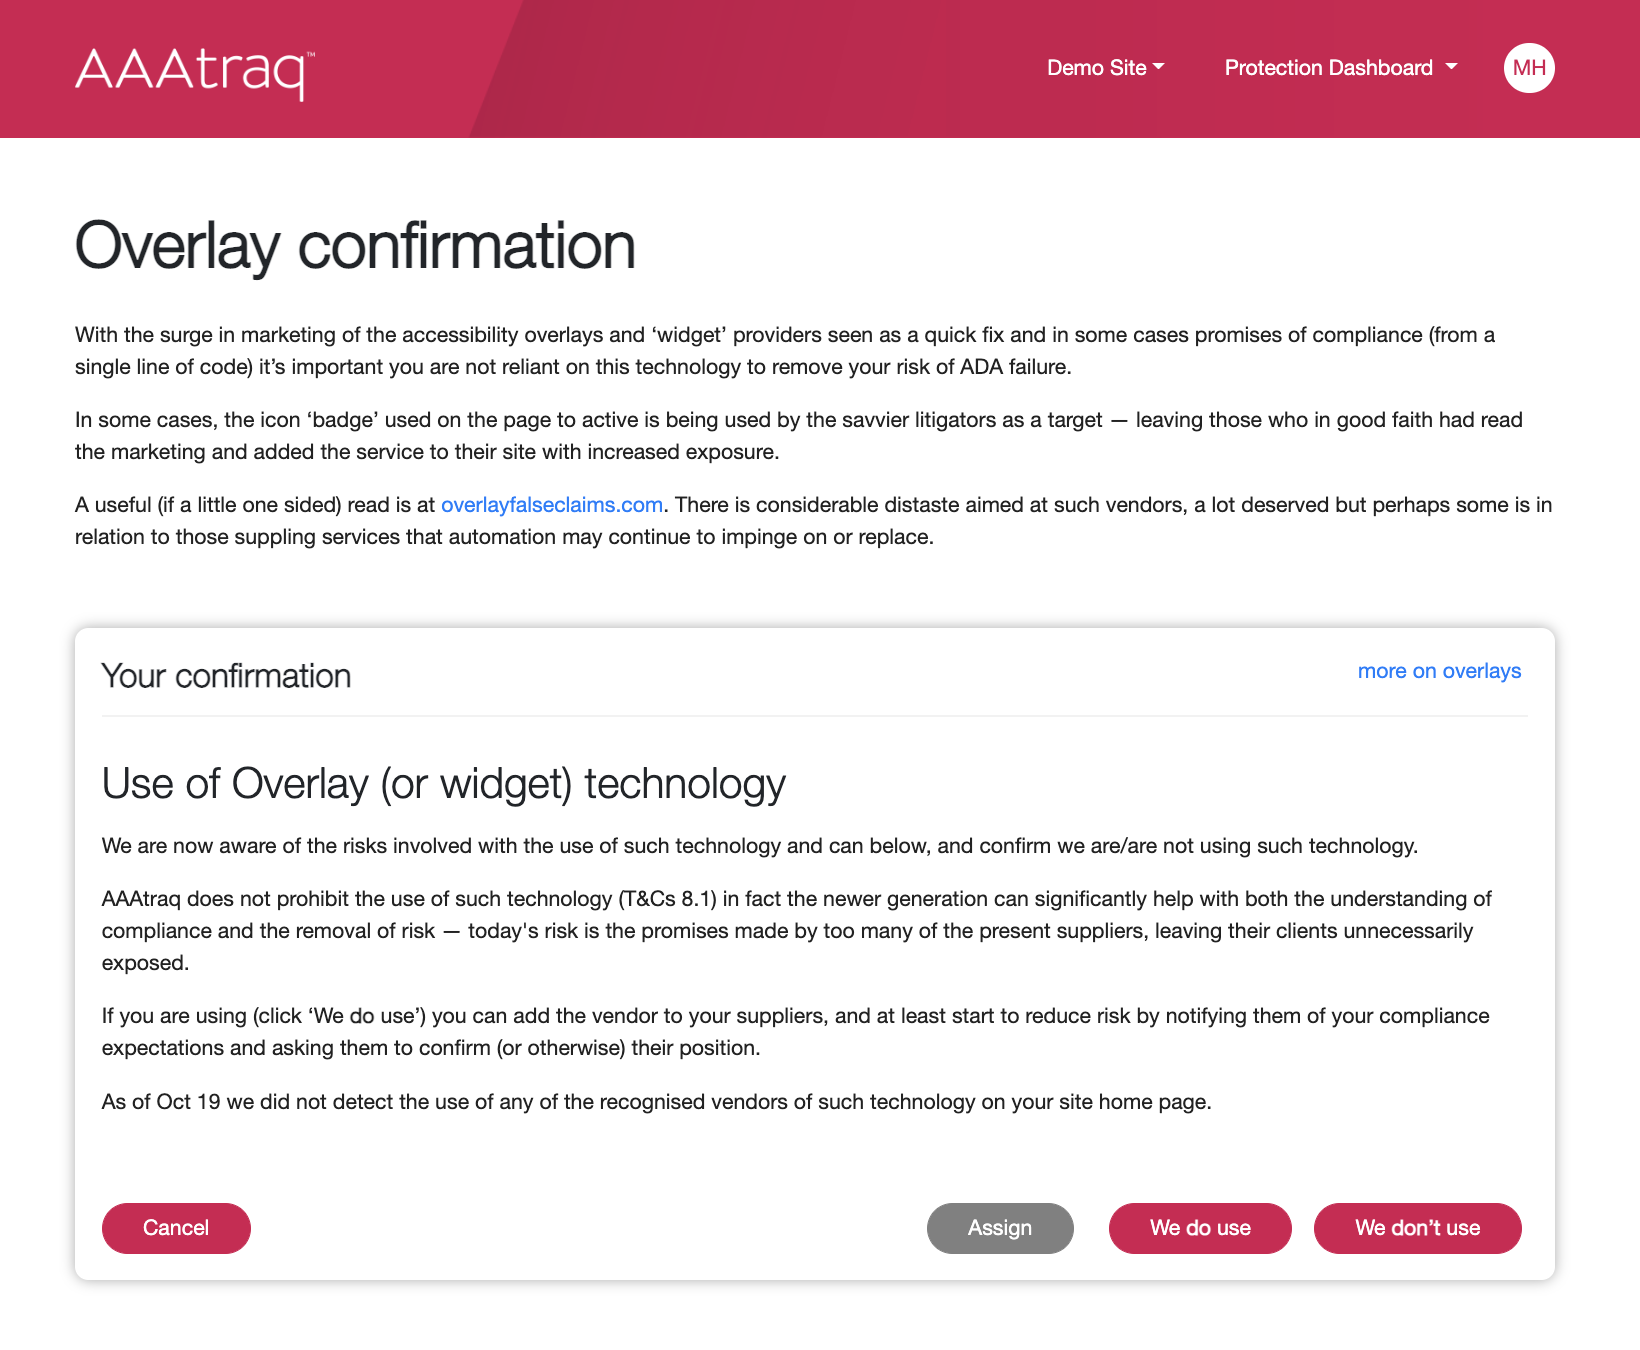 Screenshot of AAAtraq Dashboard Showing The 'Are you using an overlay action?'